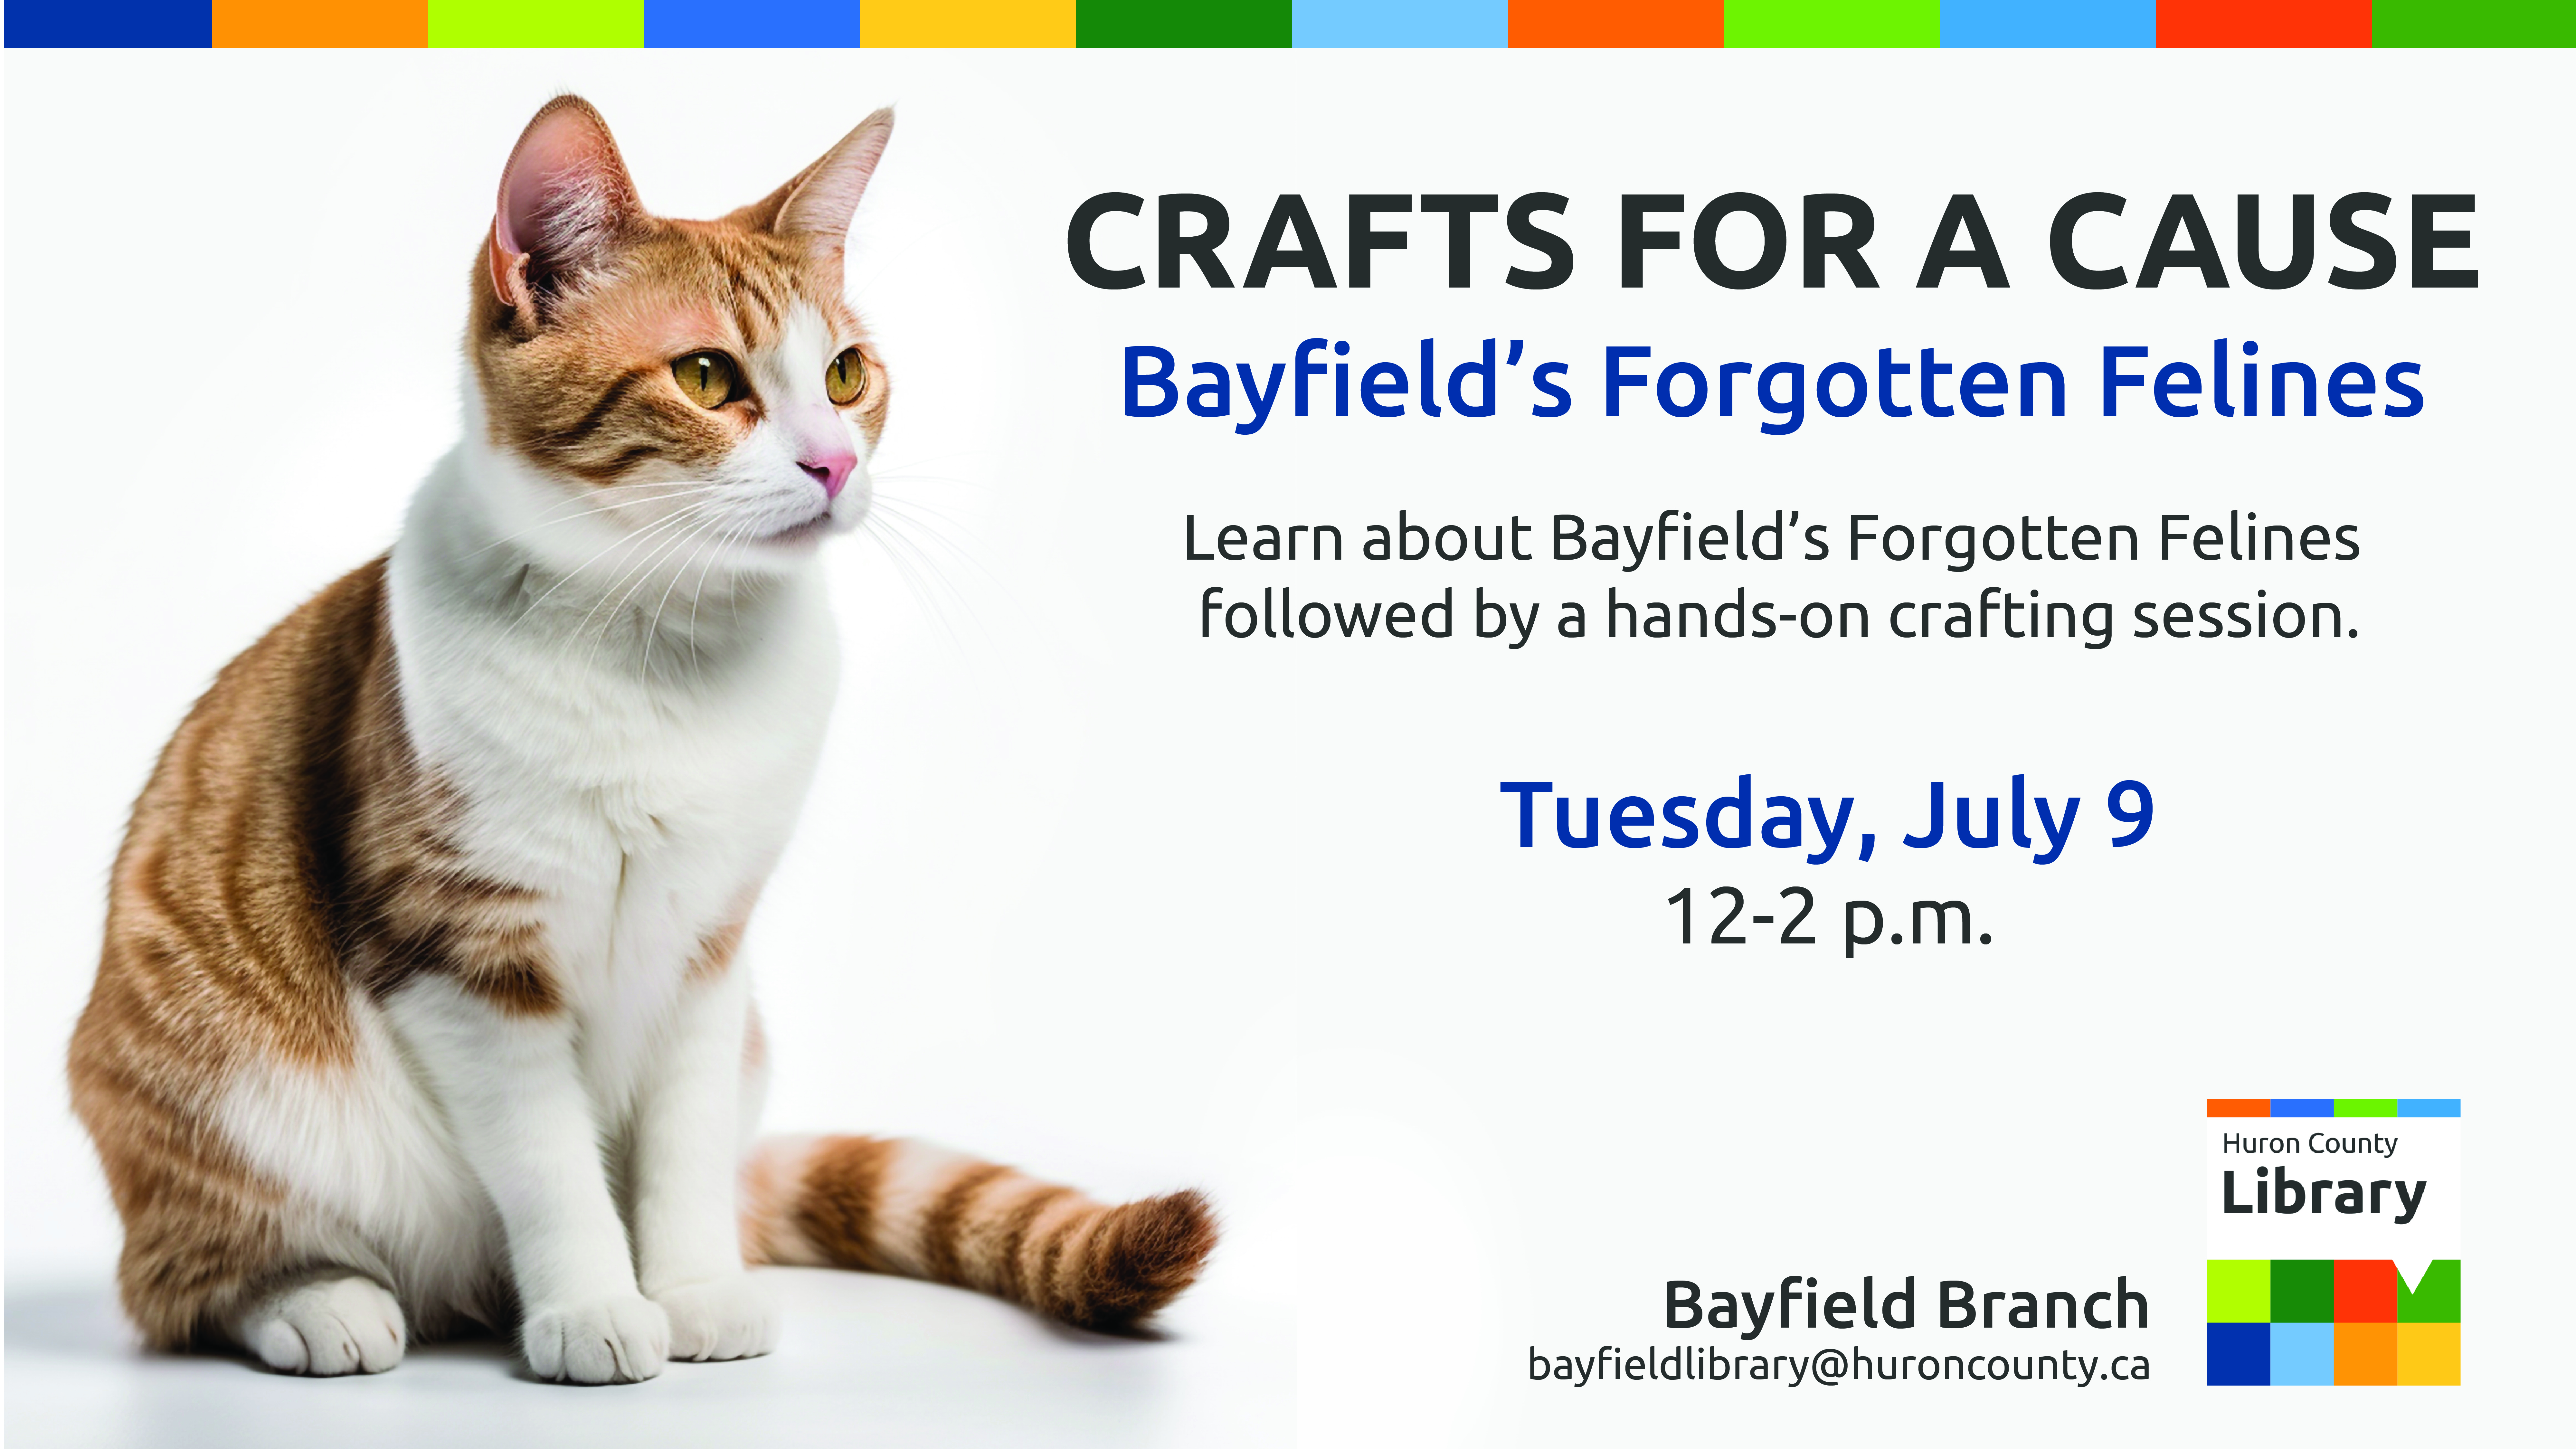 Photo of an orange and white cat with text promoting Crafts for a Cause: Bayfield's Forgotten Felines at Bayfield